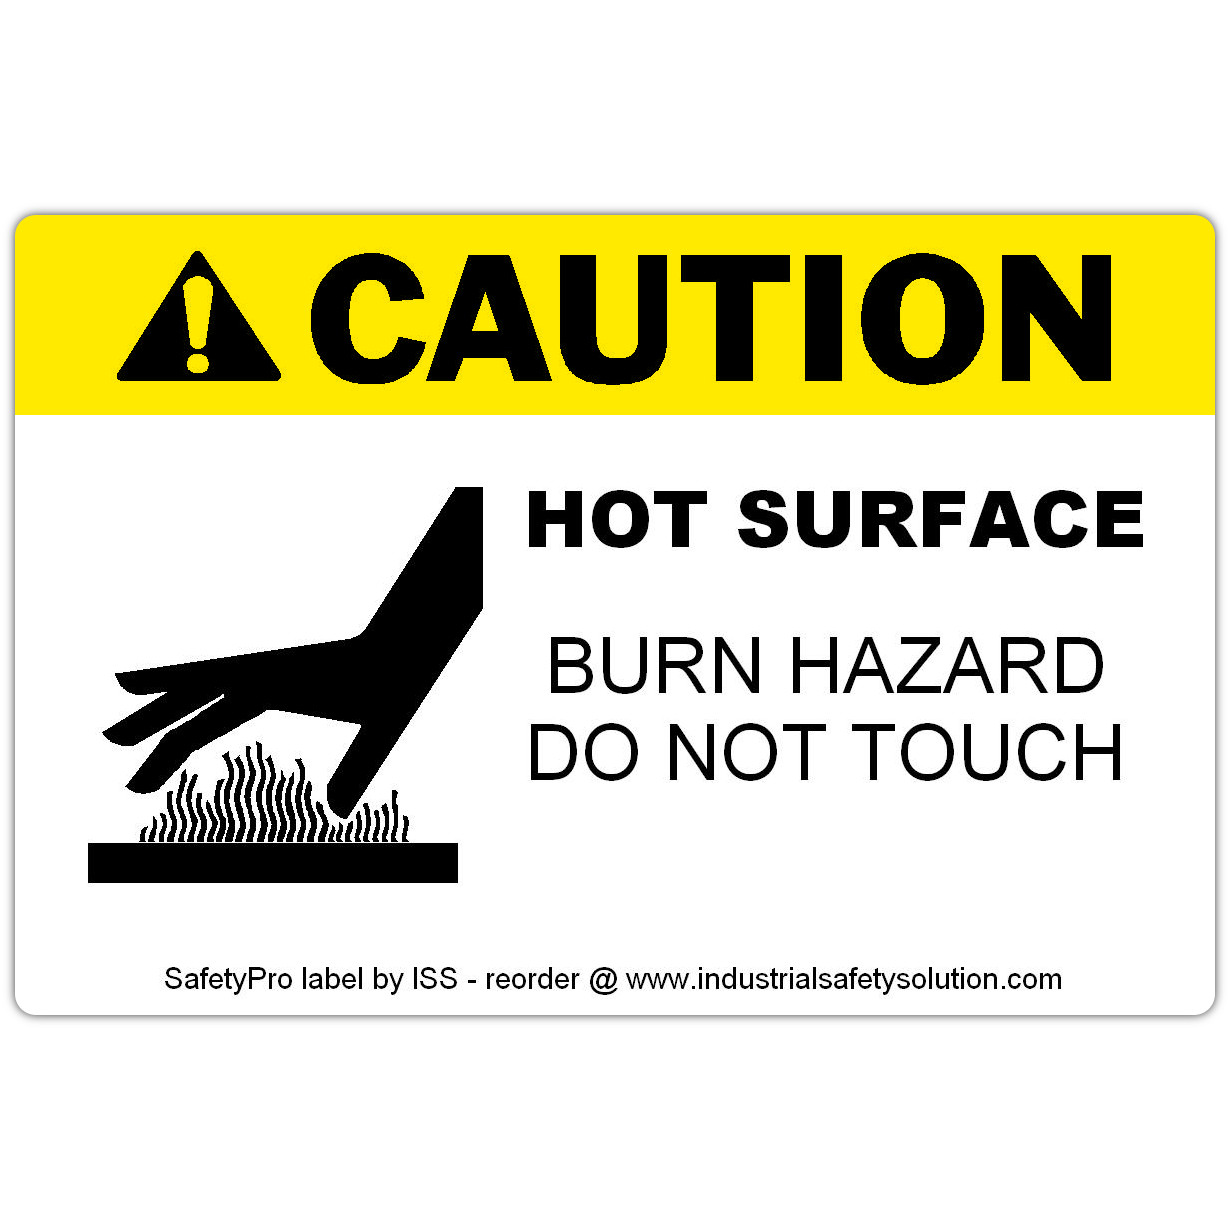 Ask a question about 4" x 6" CAUTION Hot Surface Safety Label